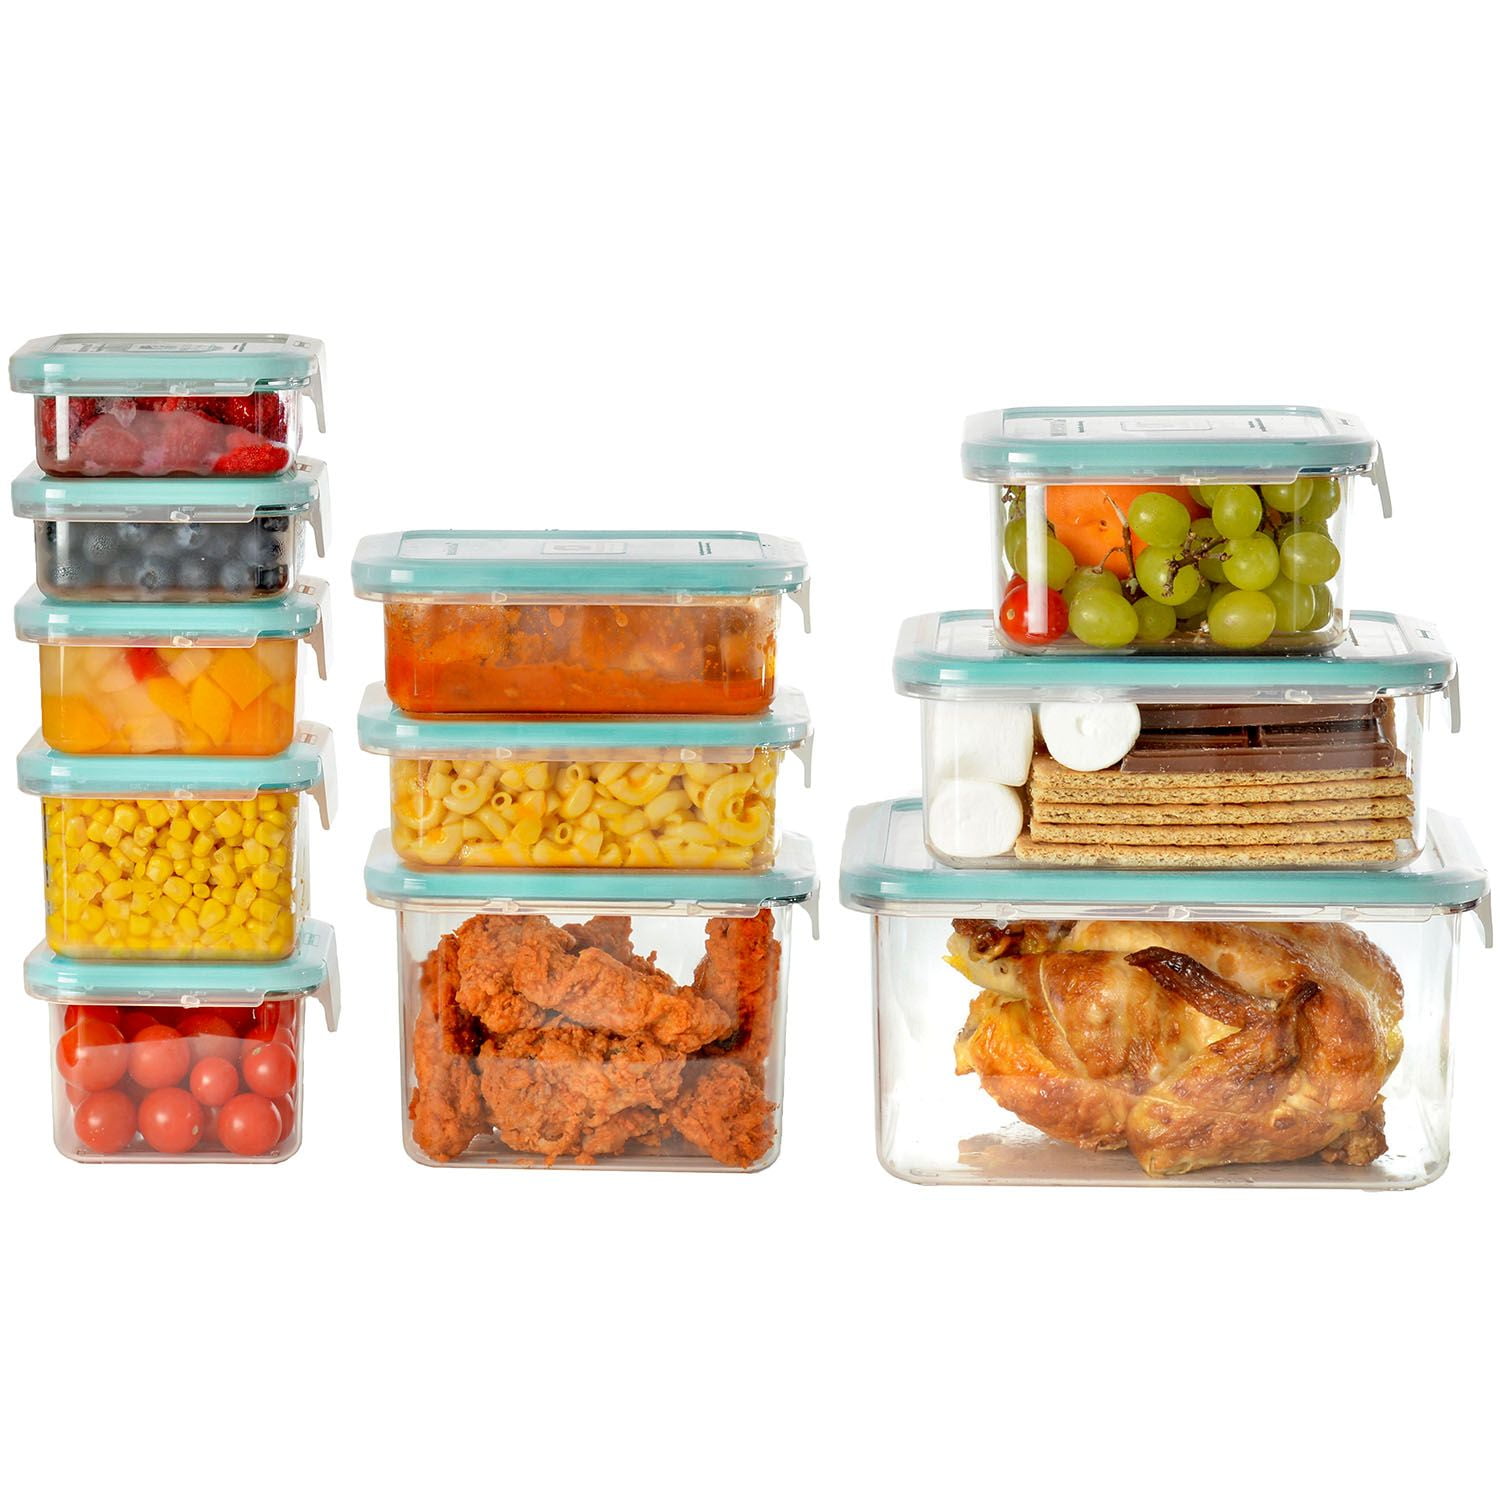 Wellslock 5.2 cups (Pack of 2) Locking Food Storage Containers with Li